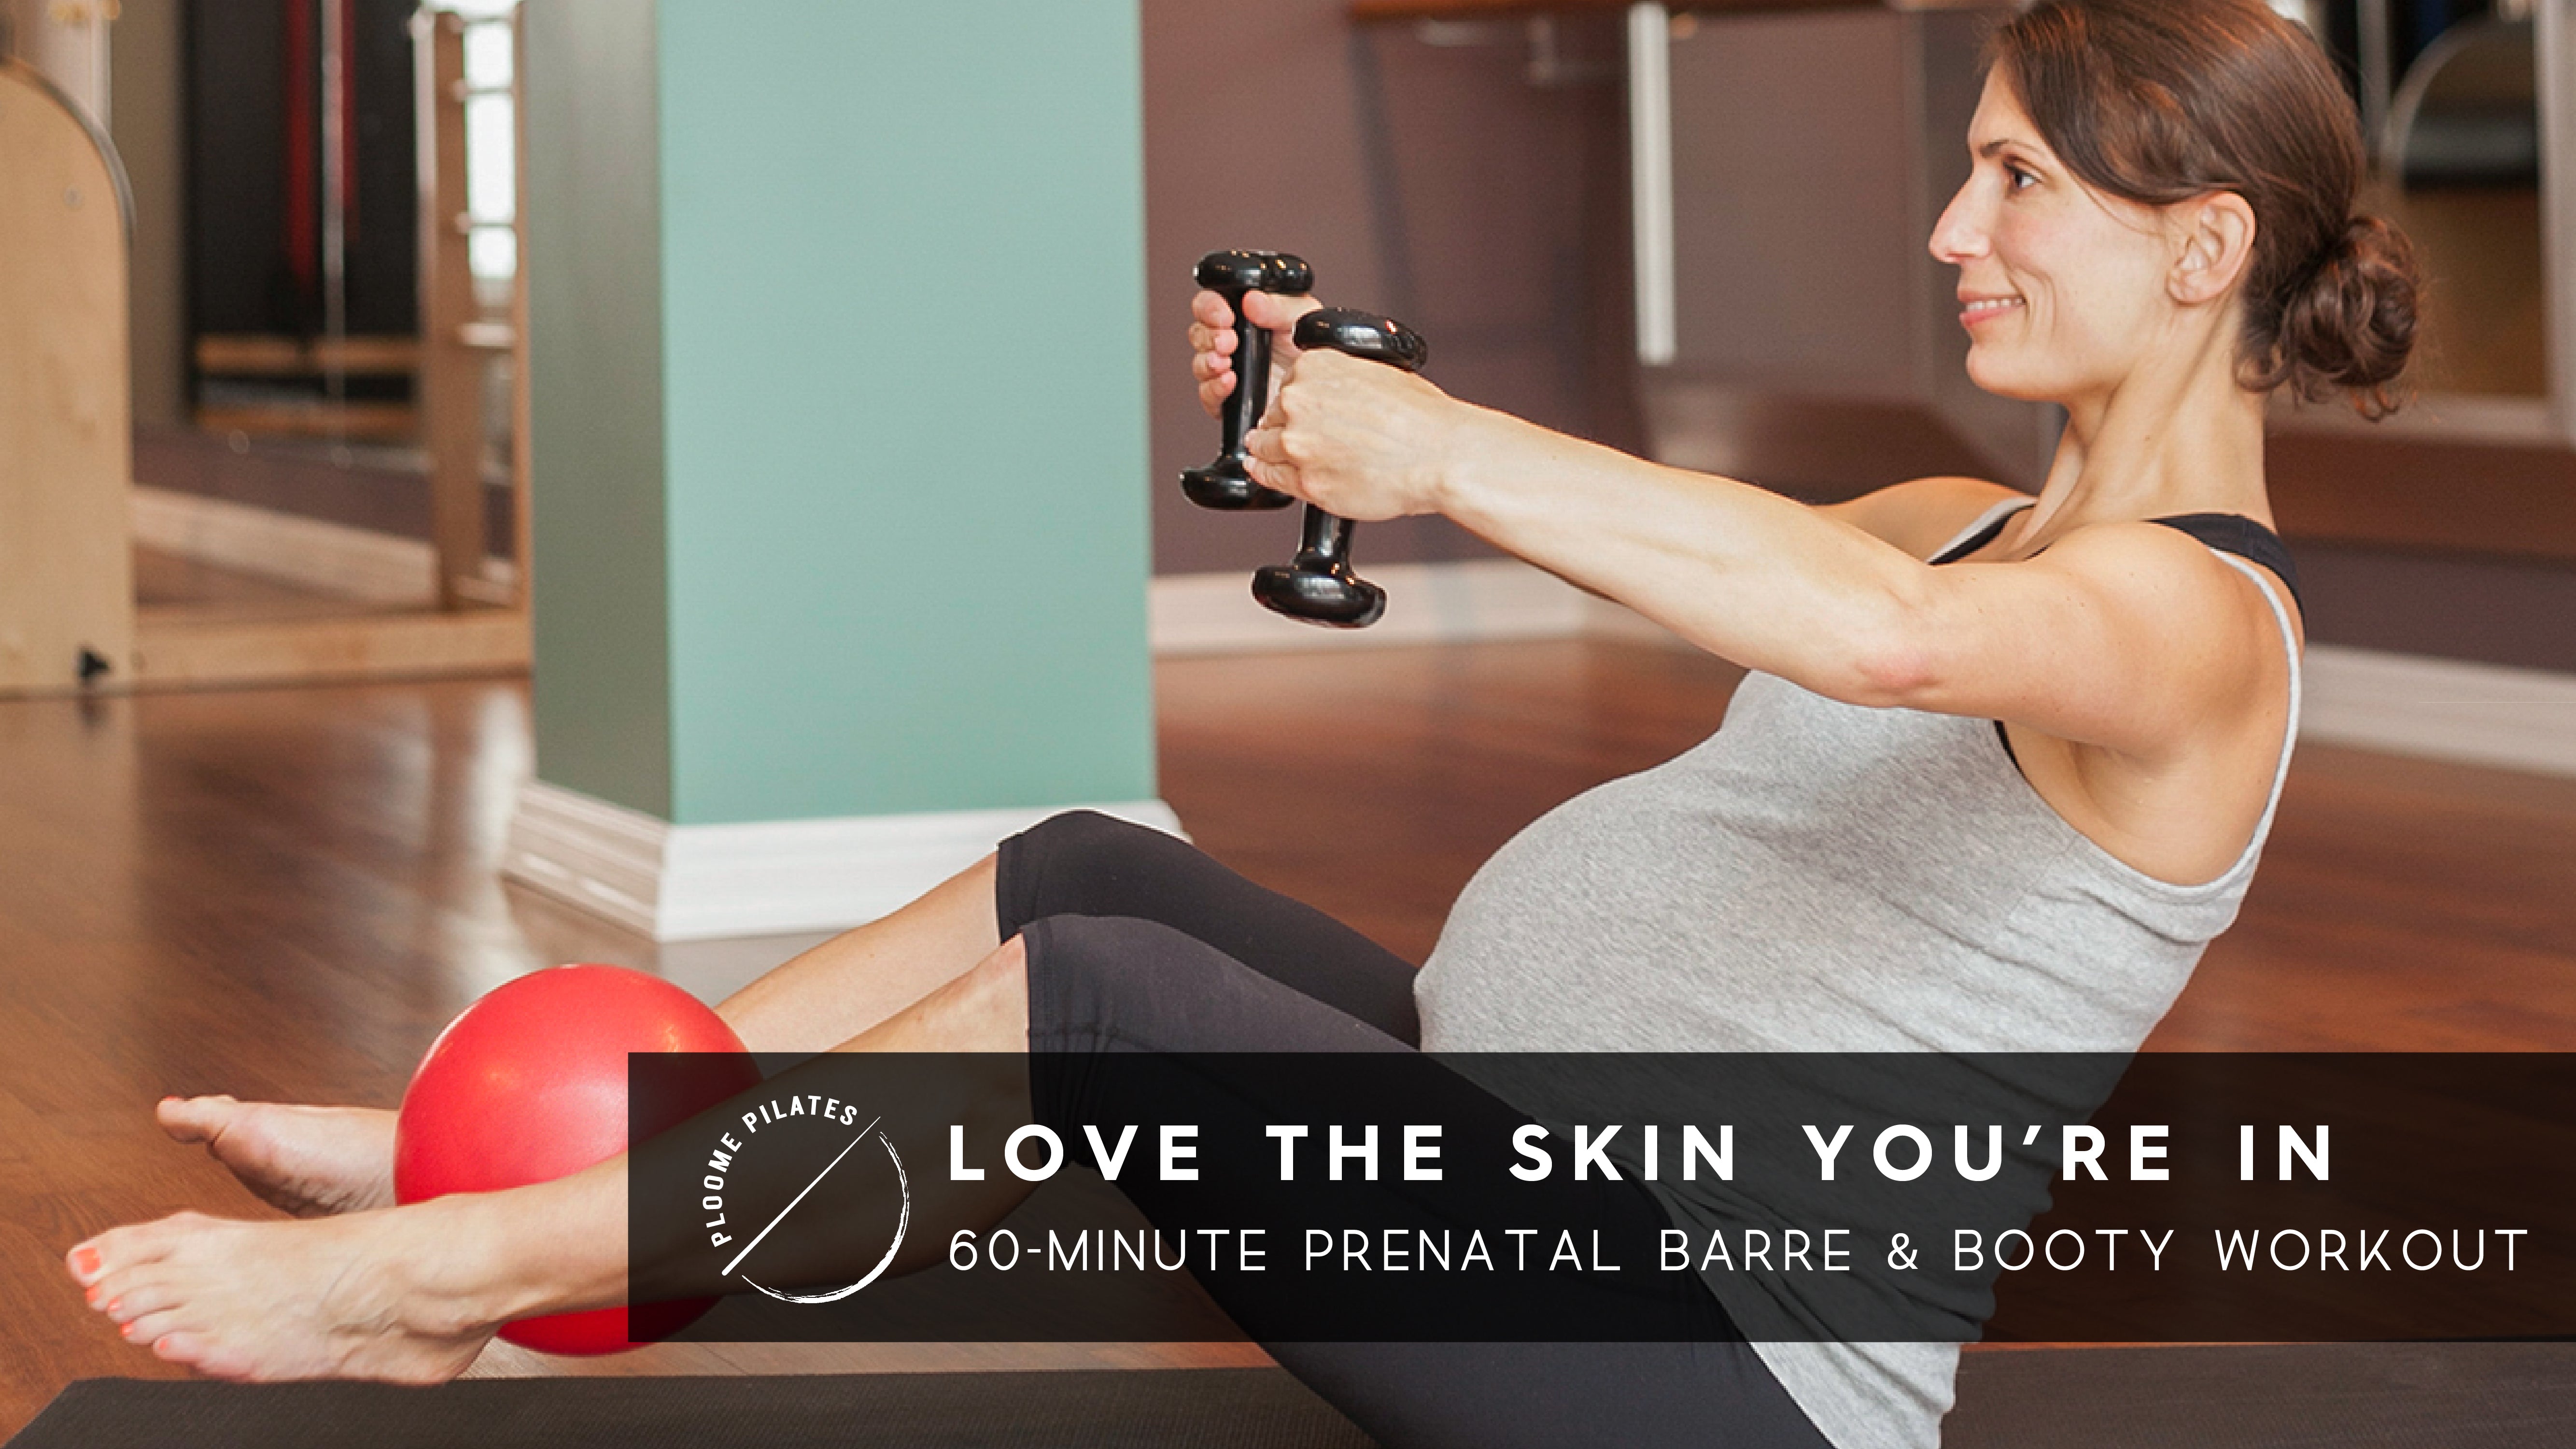 Love the Skin You're In: 60-Minute Prenatal Barre & Booty Workout